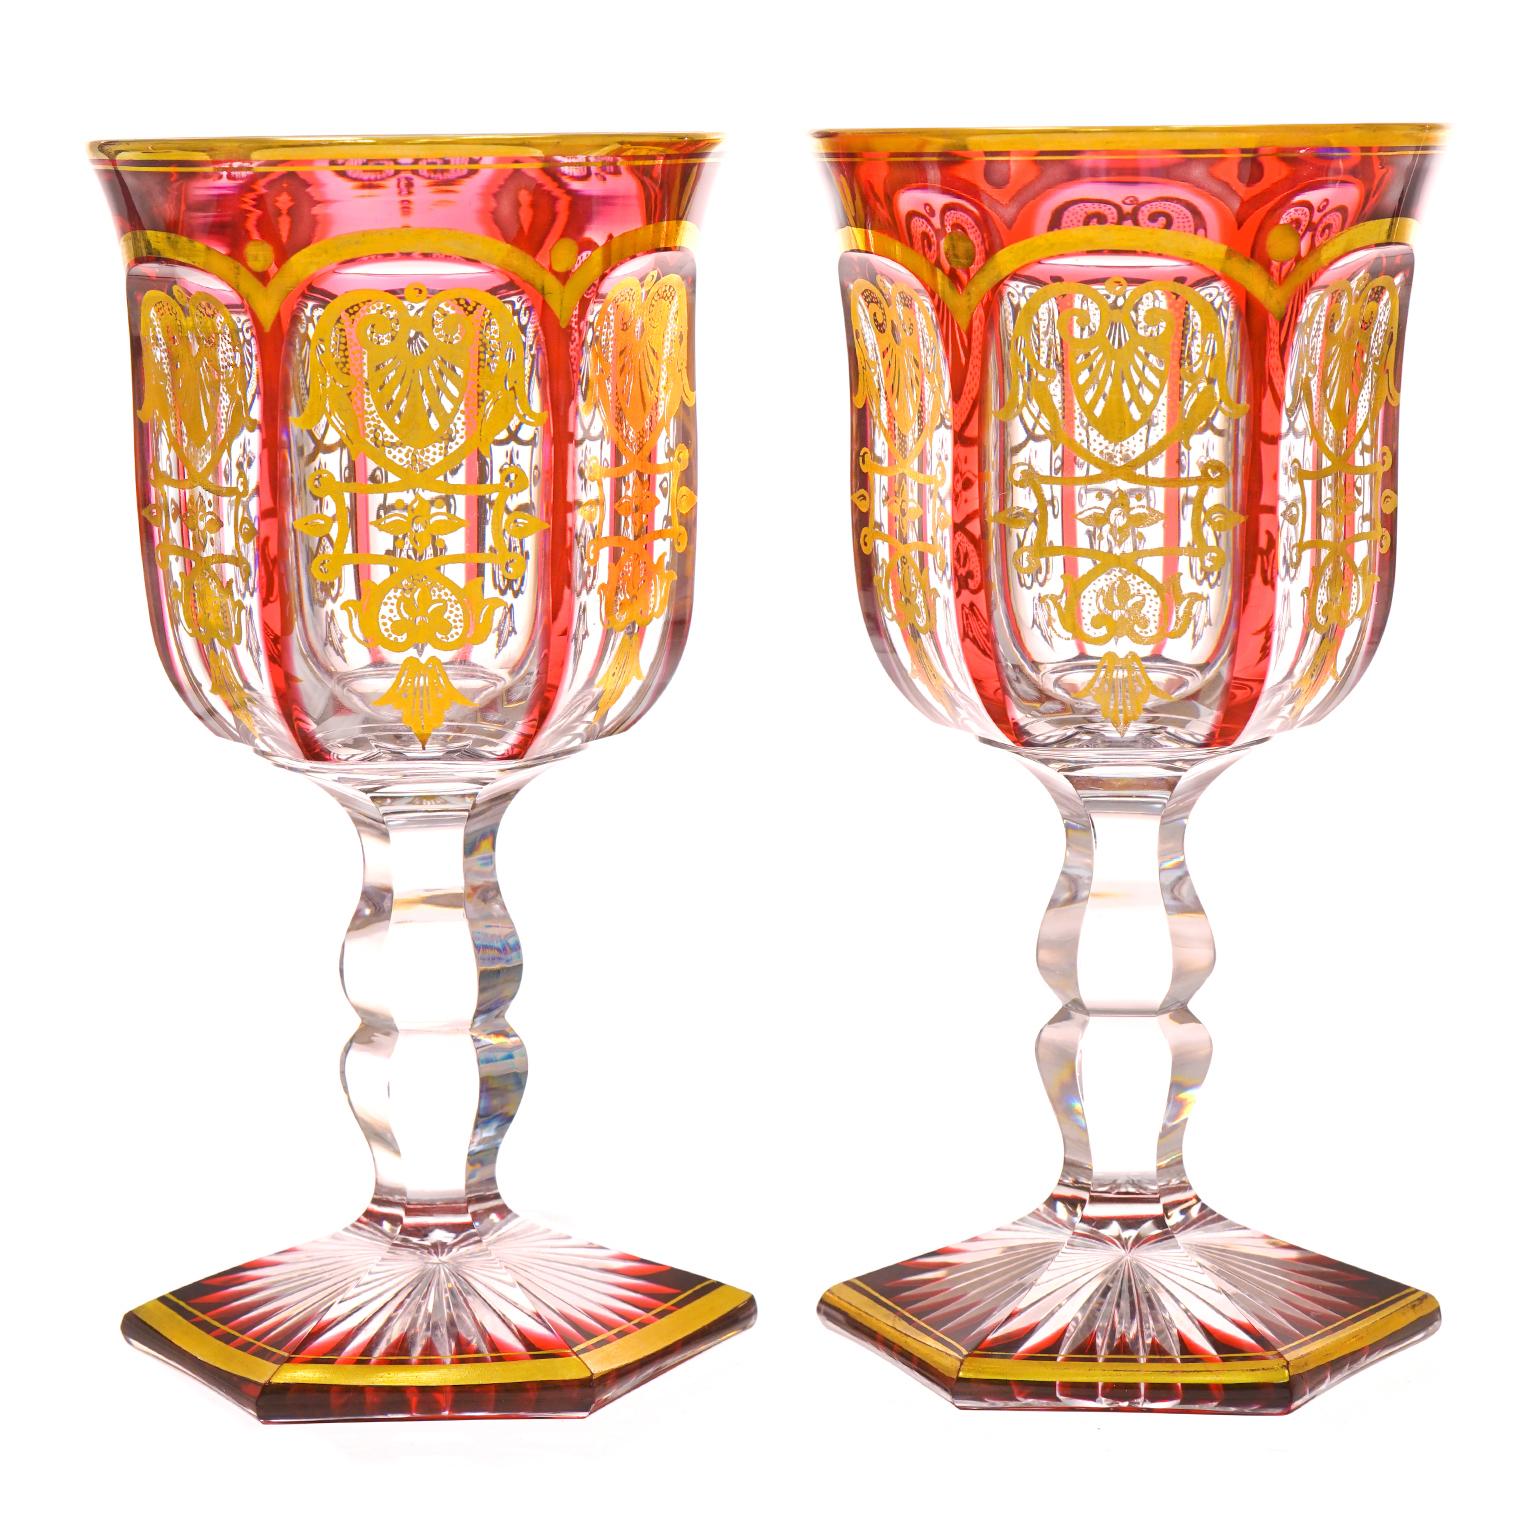 14 Baccarat Empire Ruby Water Goblets, circa 1860s